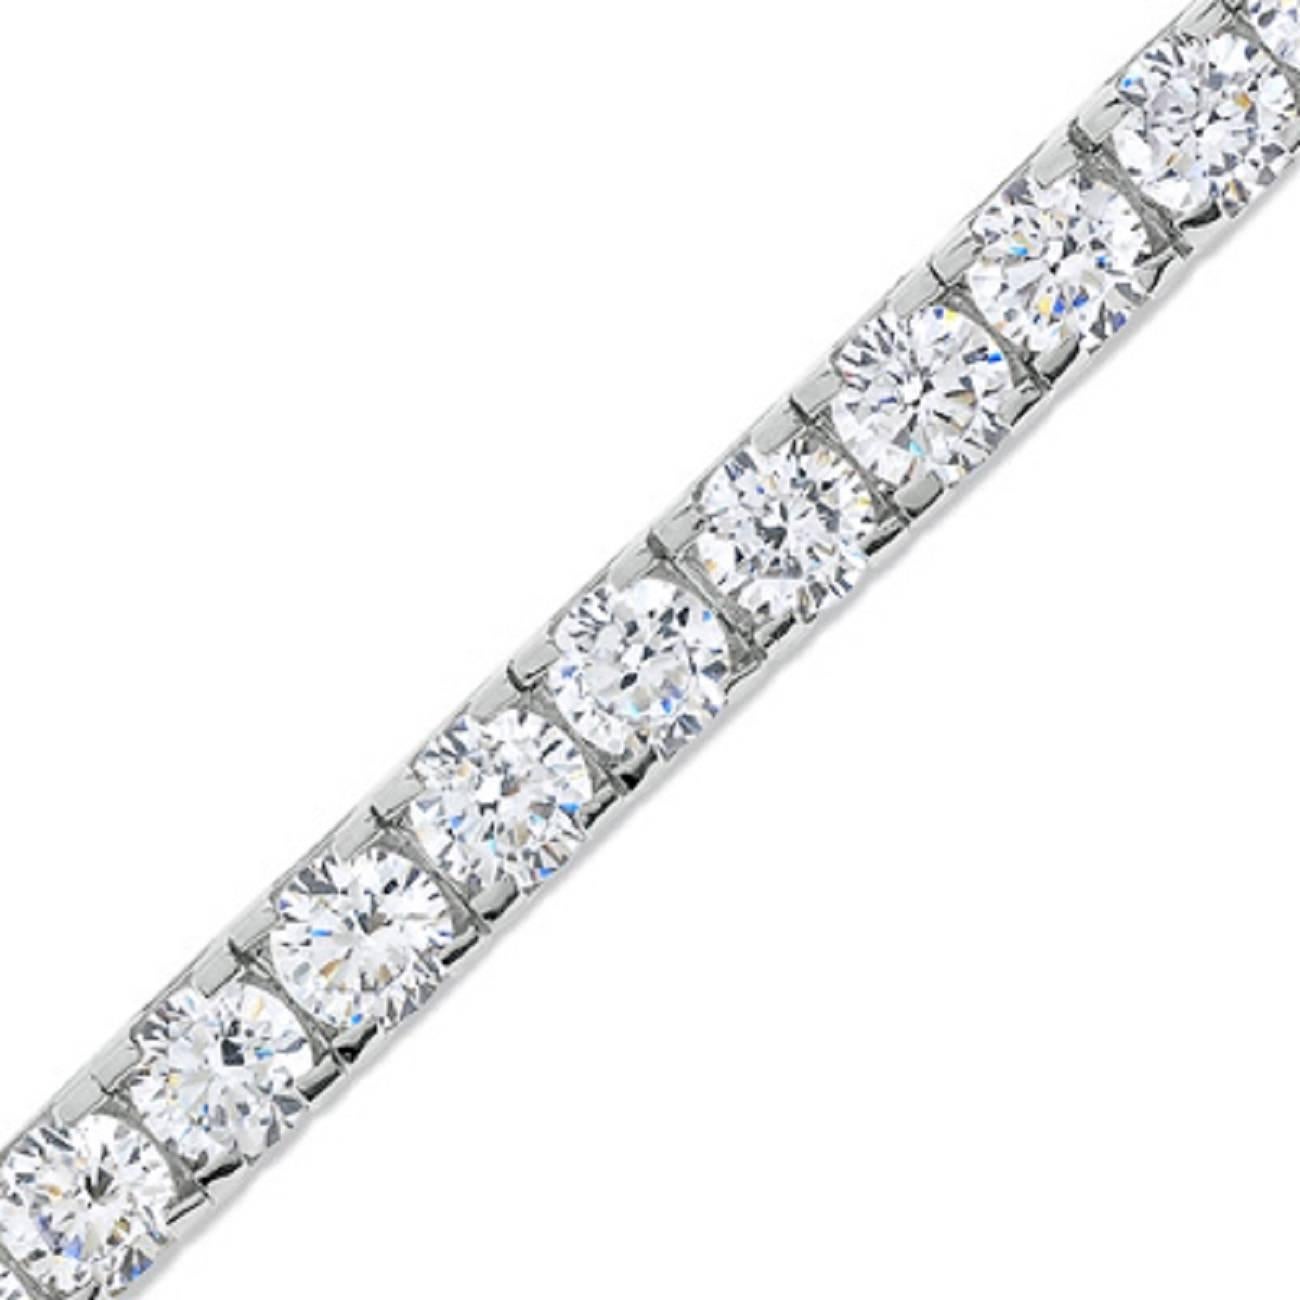 This beautiful Diamond bracelet is set on a 14k white gold.
The color is G-H and the clarity is SI

We have one week return policy, if you are not satisfied with the item, plus, a life time guarantee for any upgrade you would ever want.